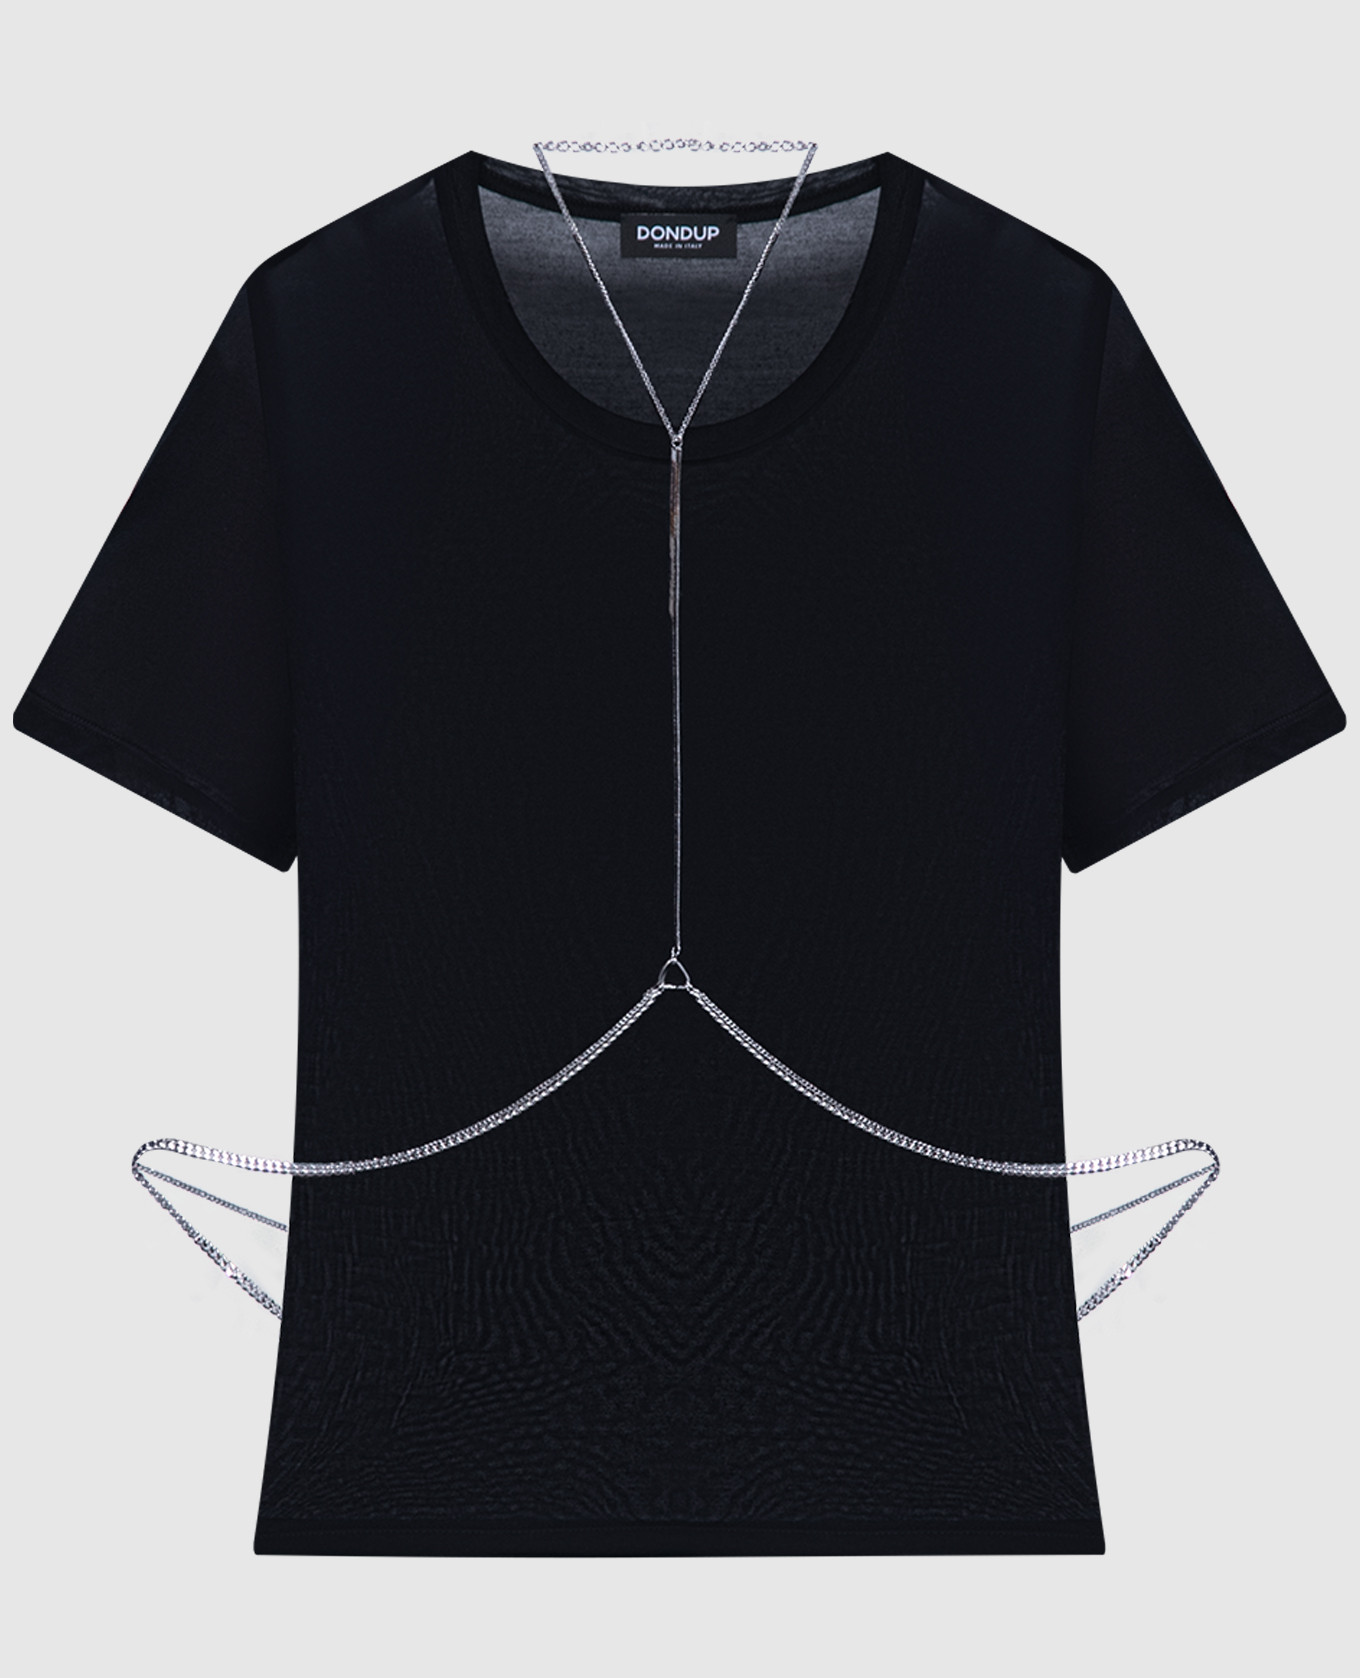 Black t-shirt with a chain